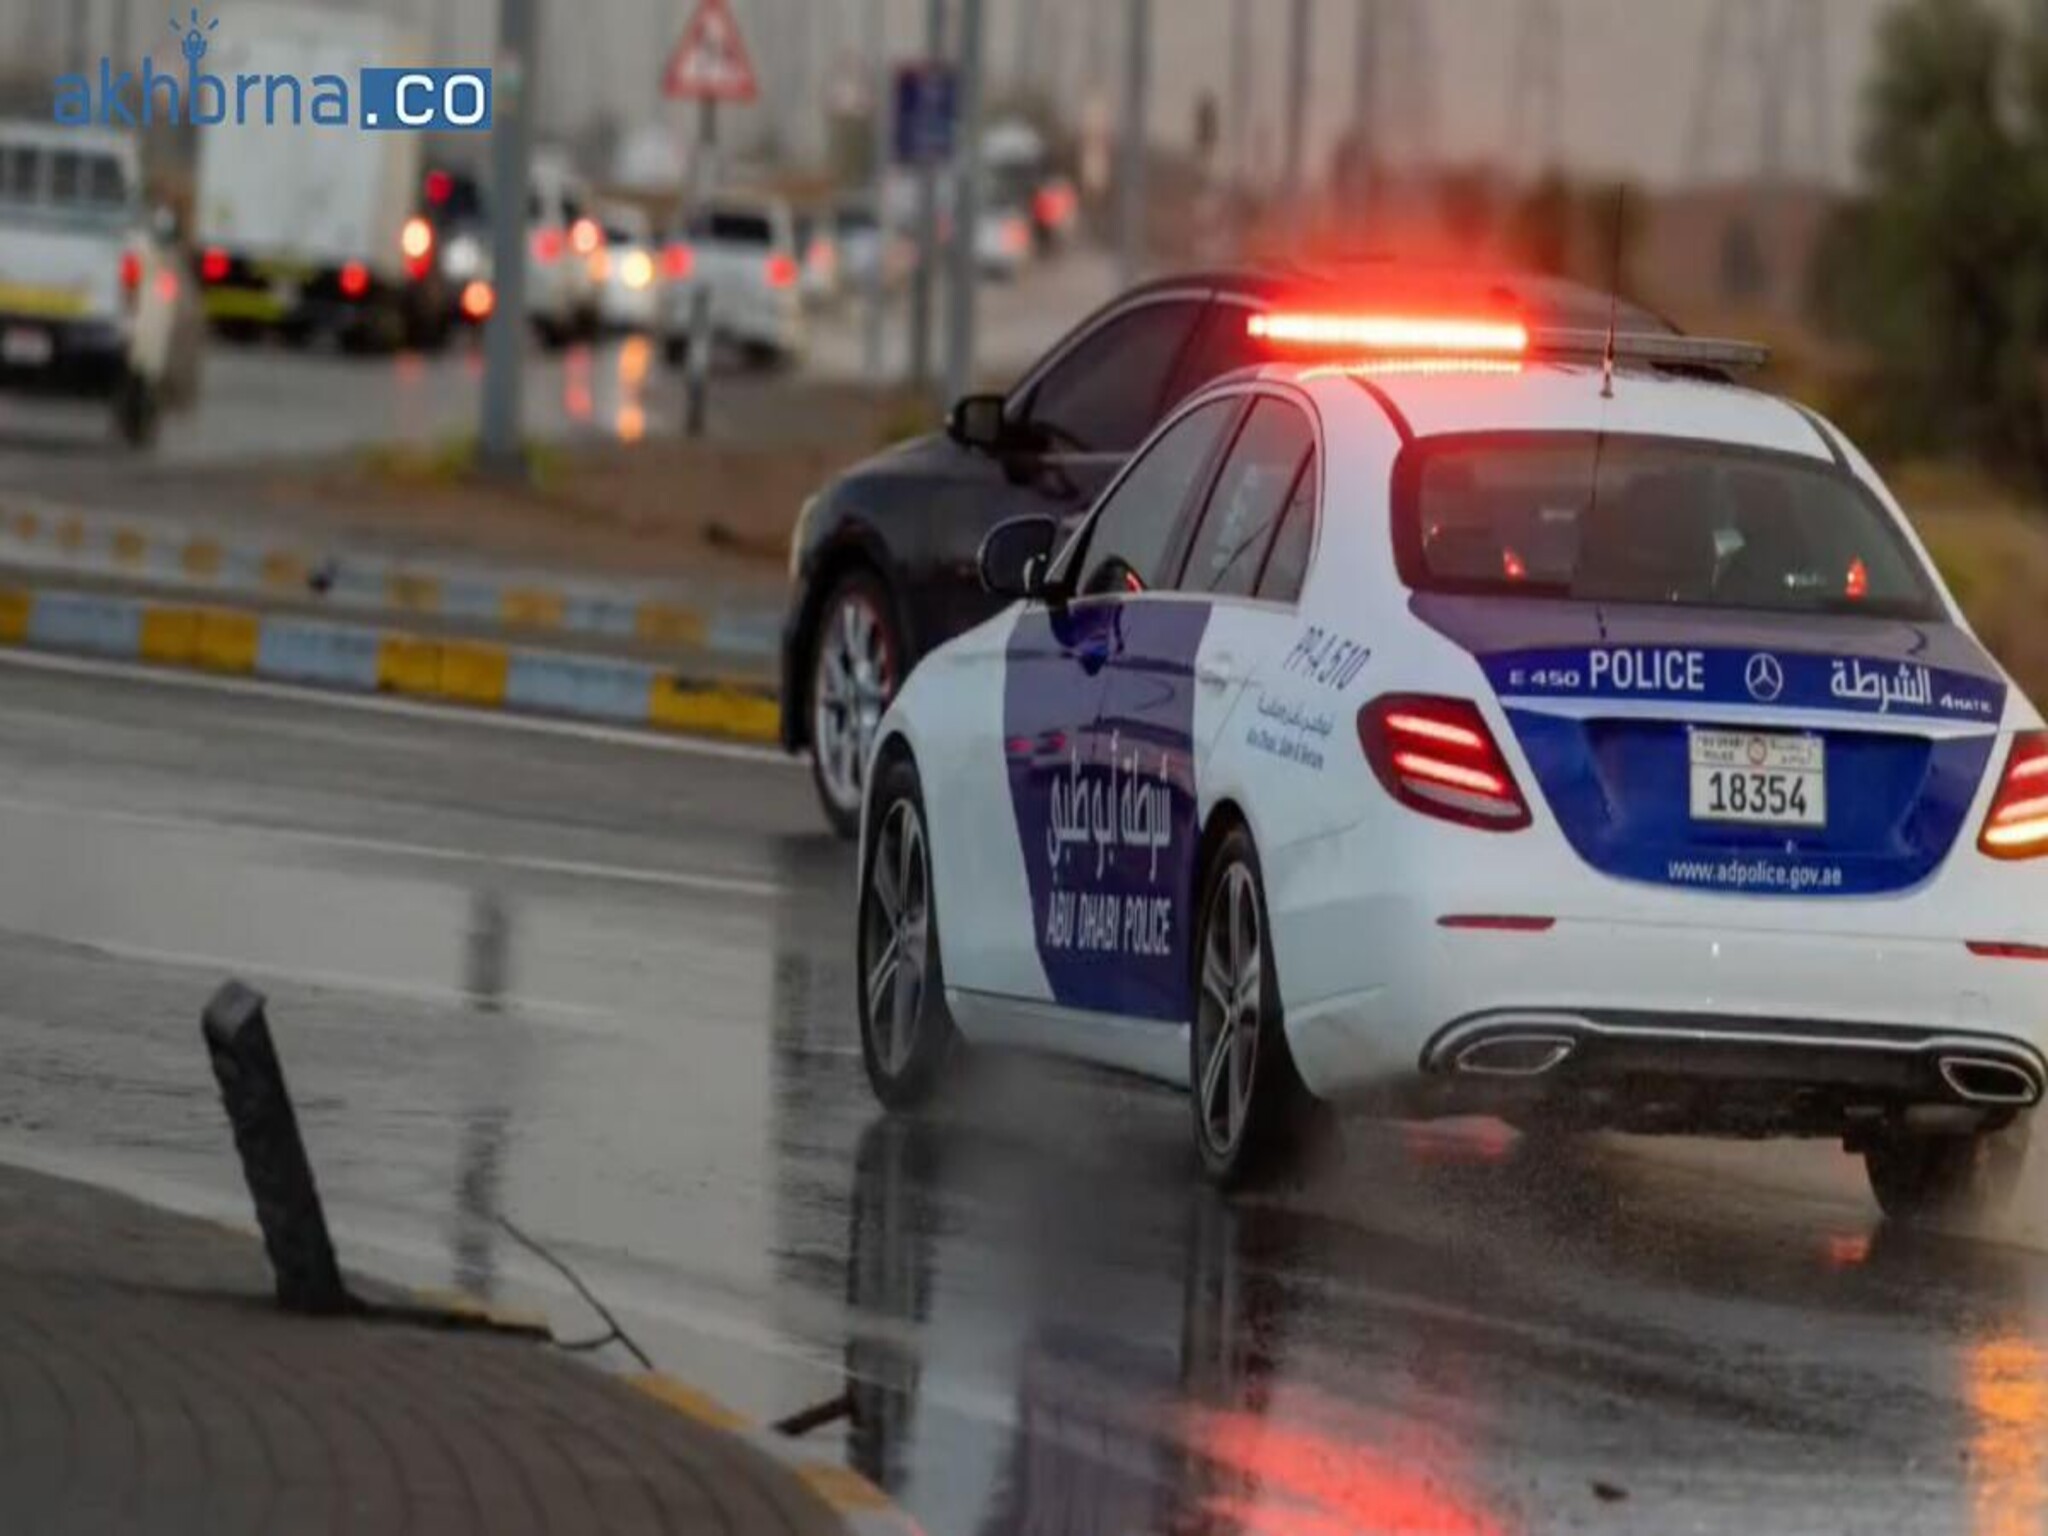 Abu Dhabi Police Urges Safe Driving, Avoid Distractions in Hazardous Weather